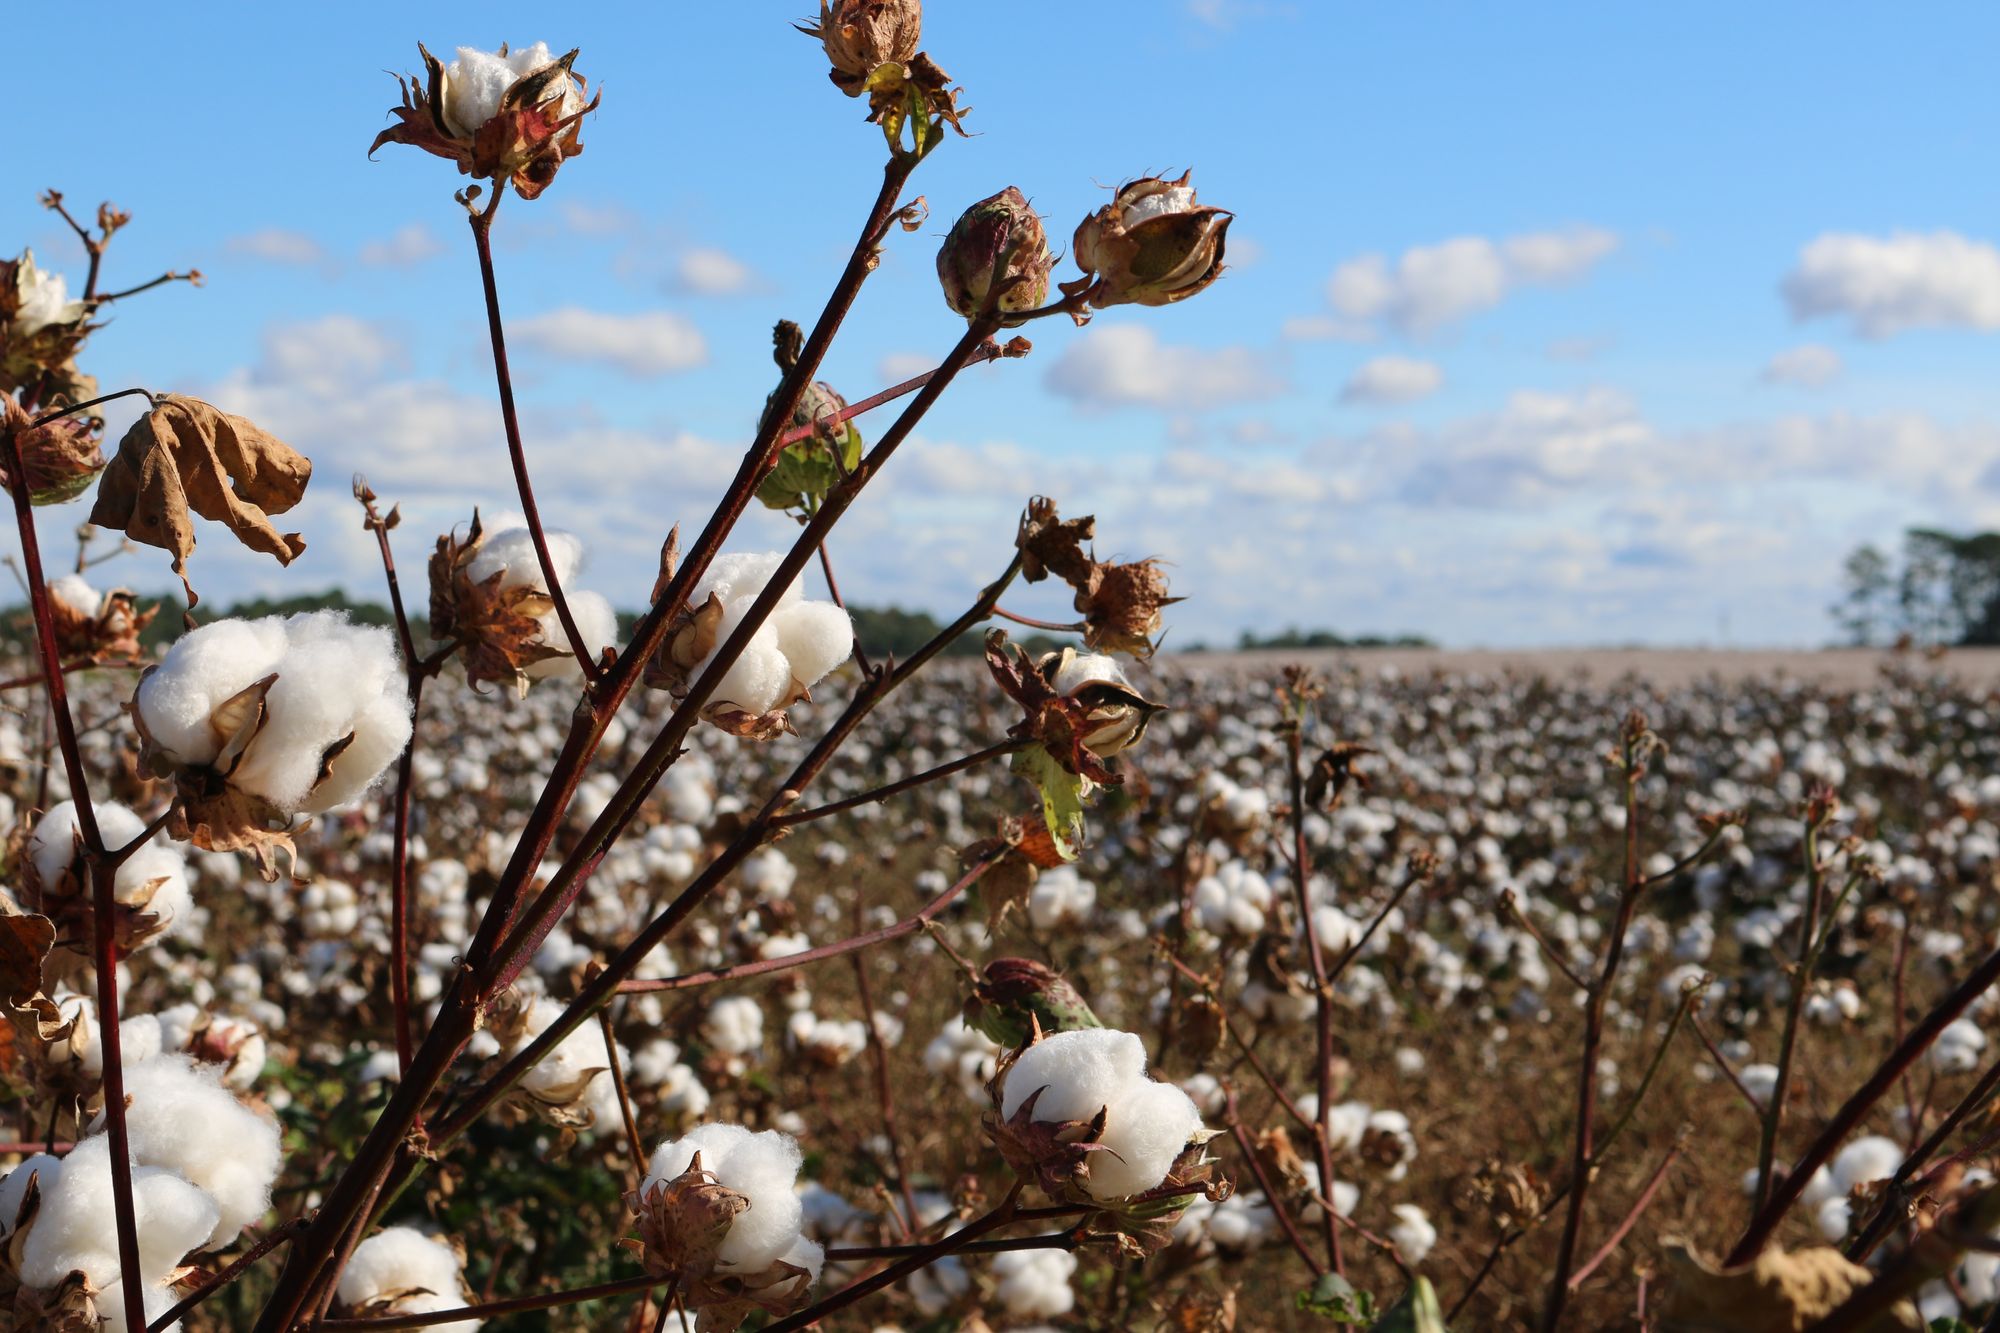 Geospatial Technology in Action: Mapping Sustainable Cotton Sourcing